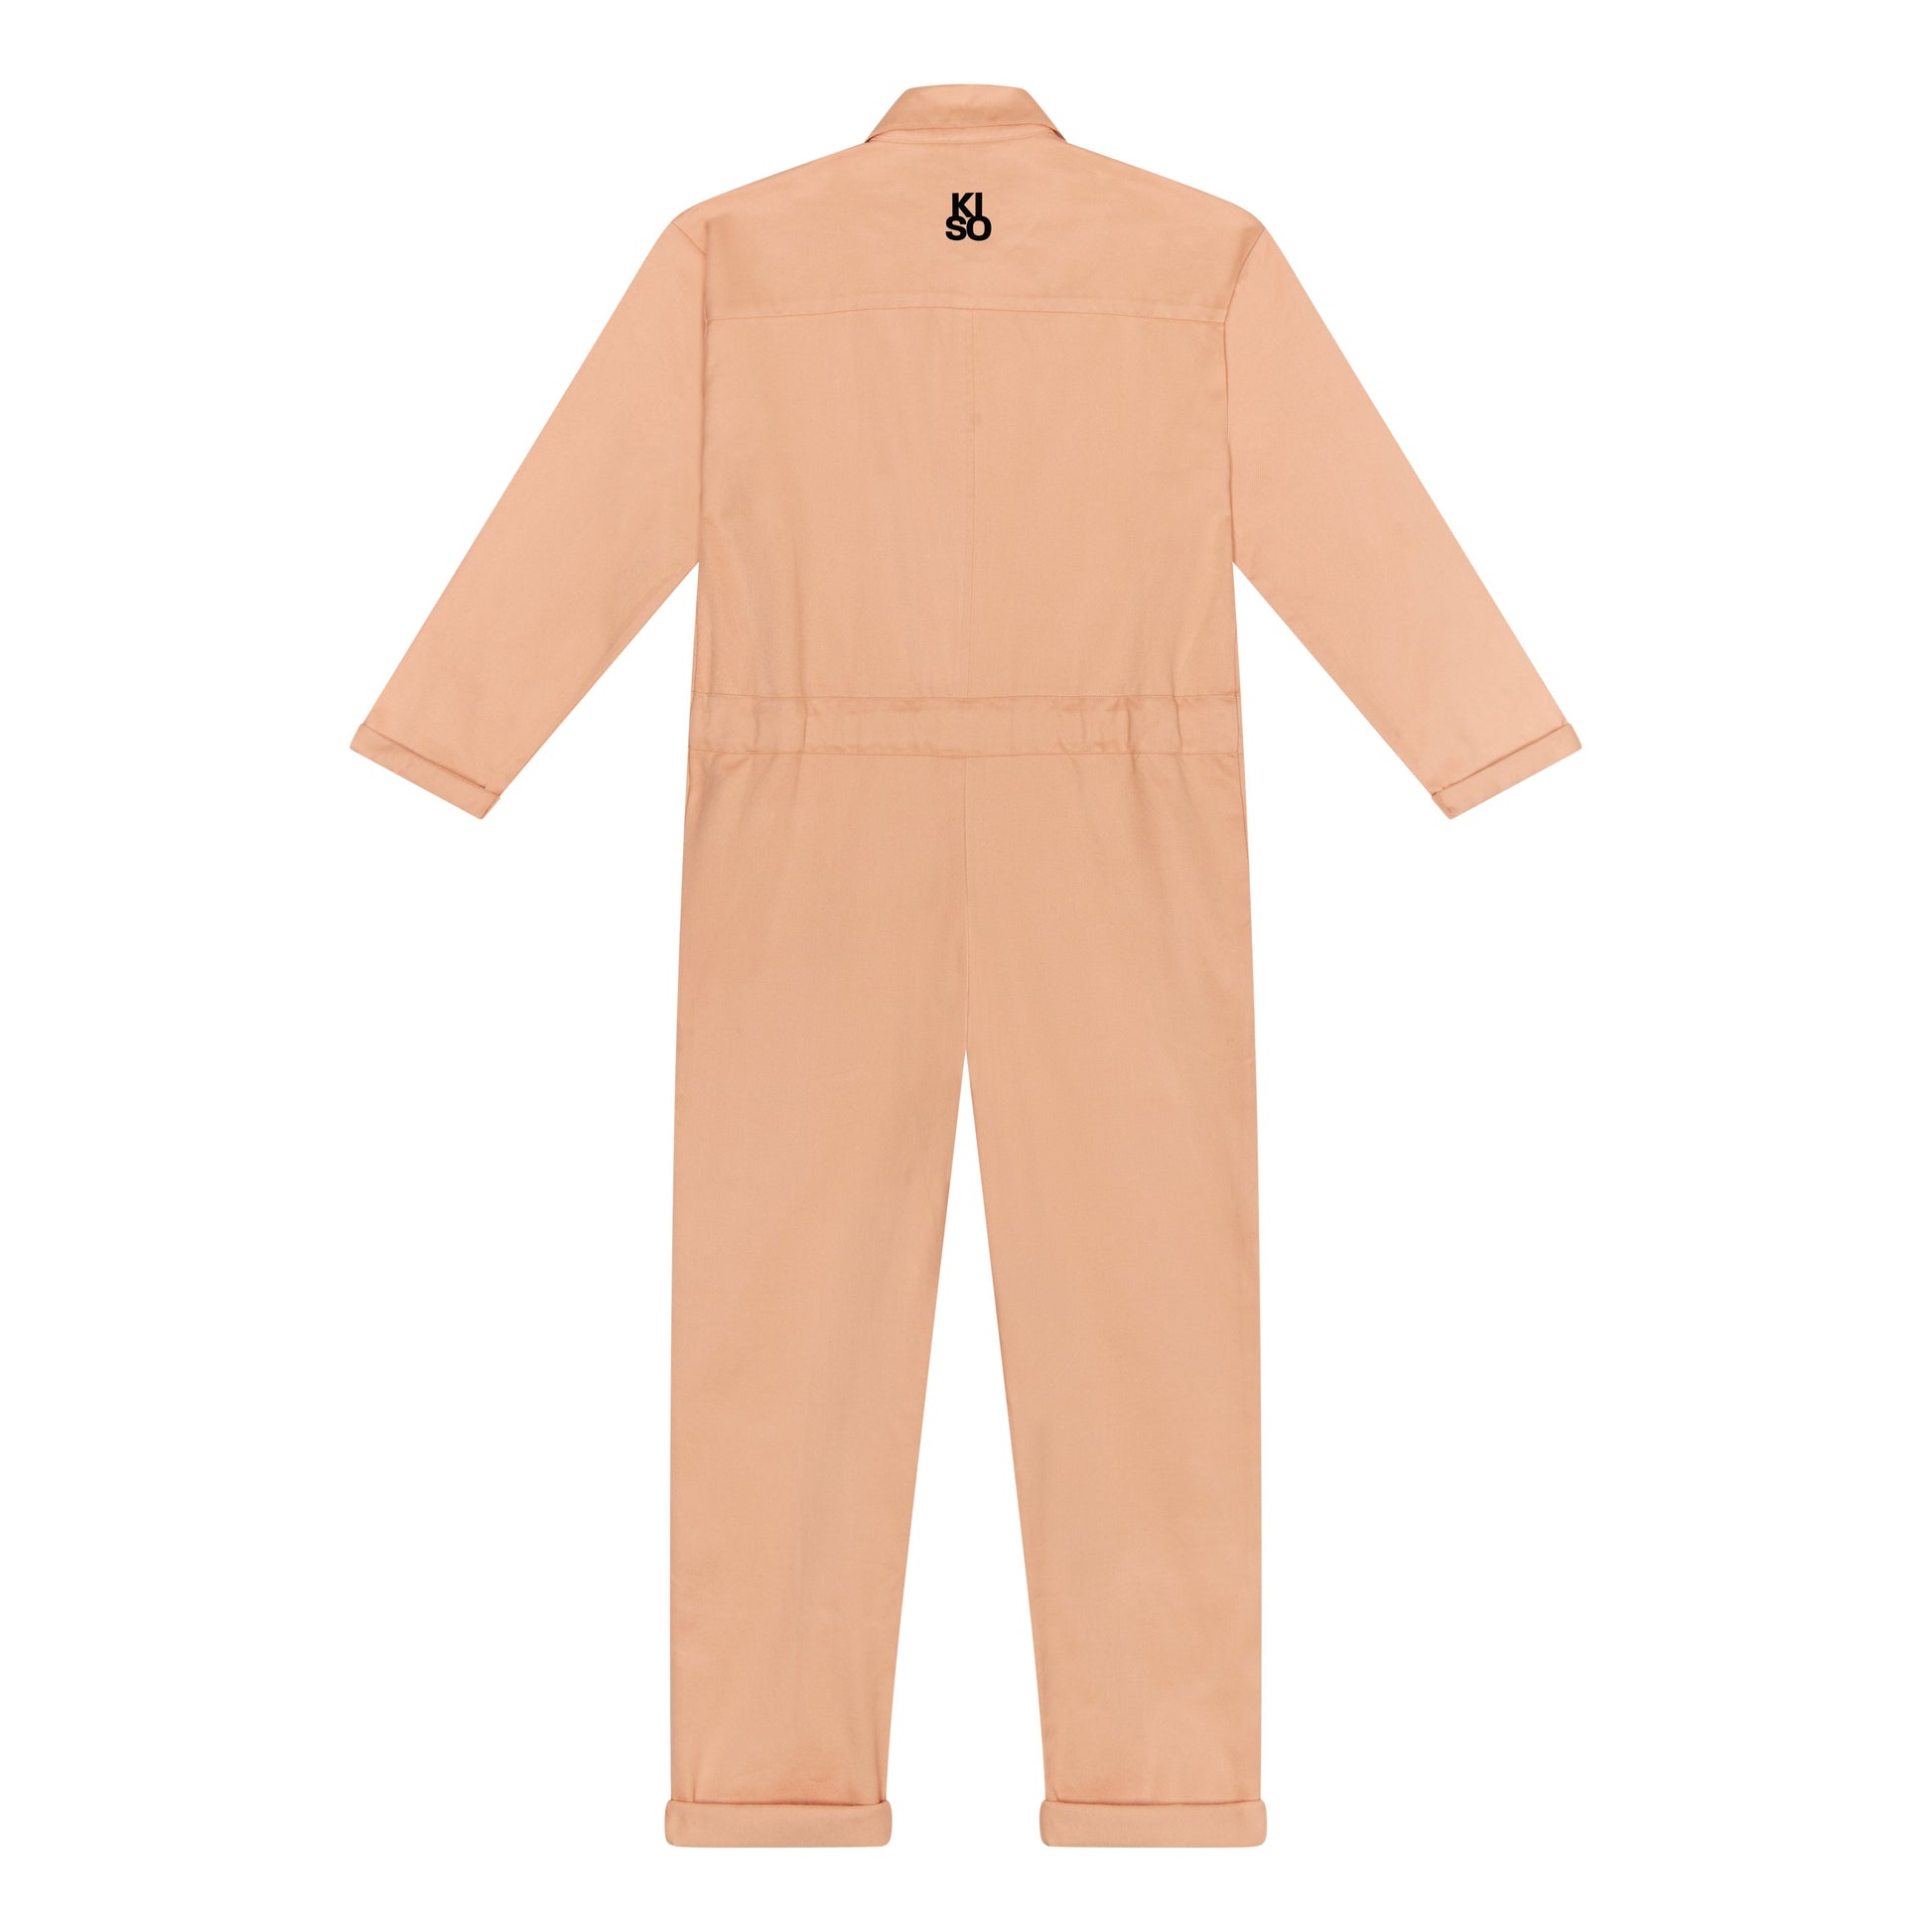 Kiso Apparel Limited Edition Adult Boiler Suit - Clay